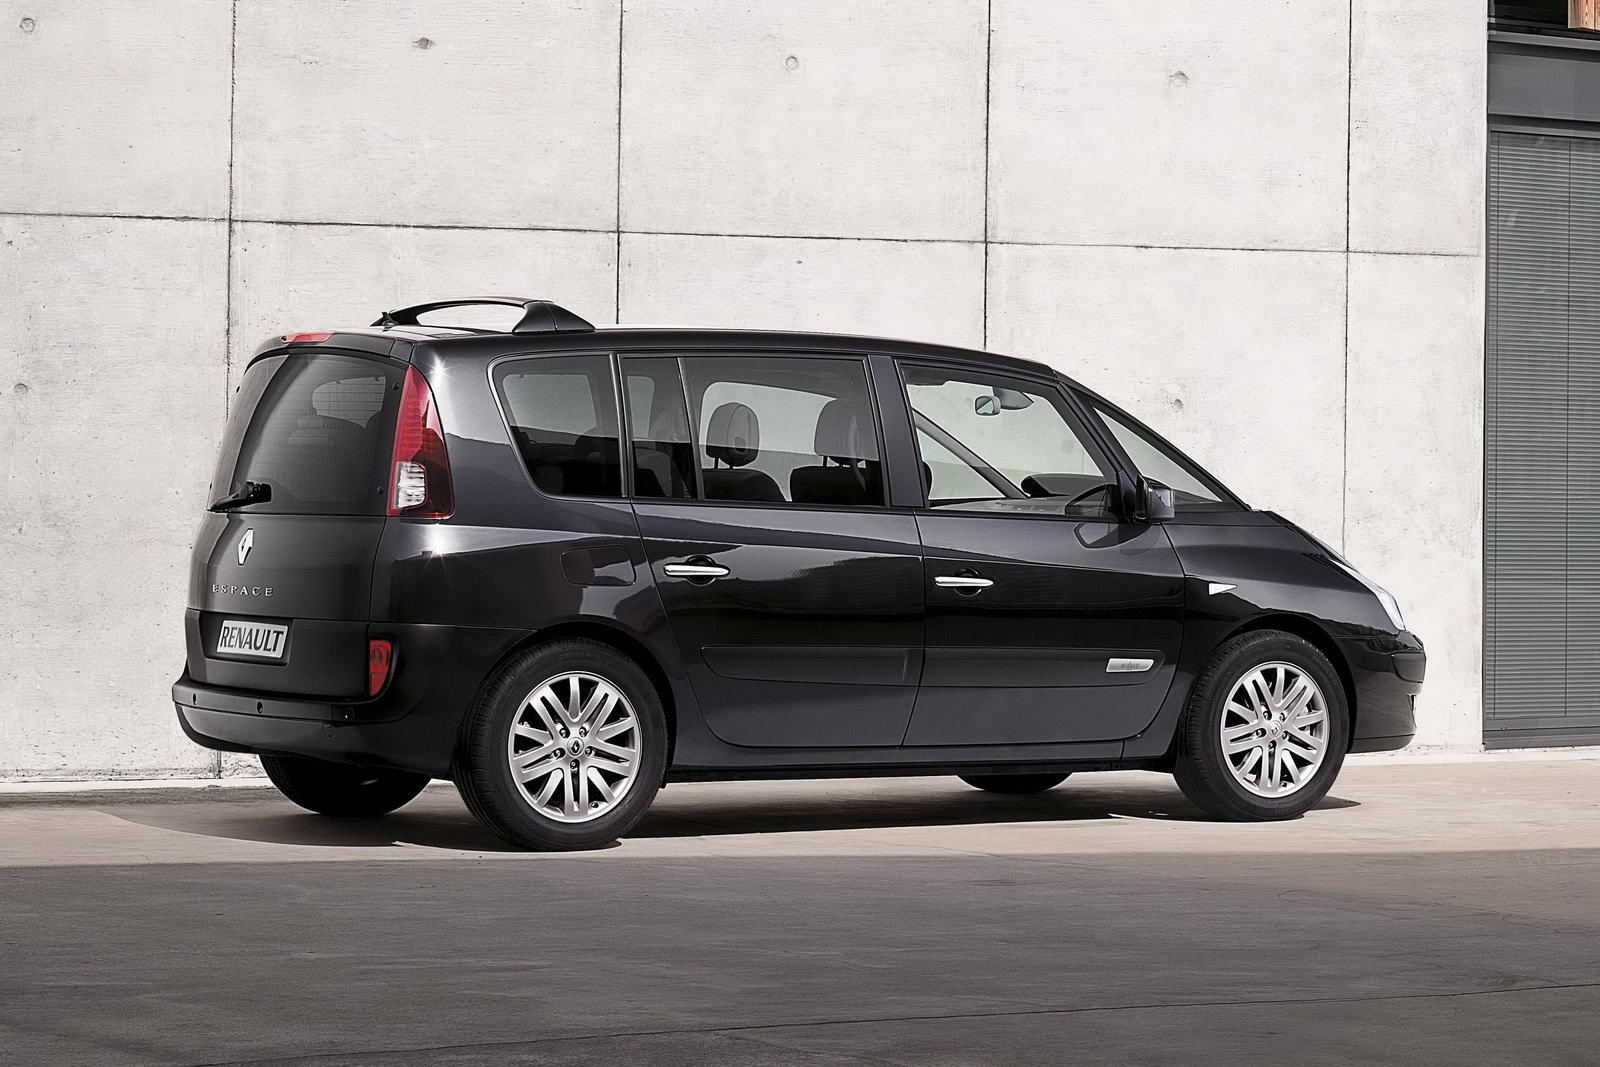 Refined 2011 Renault Espace MPV Priced from £24,495 in the